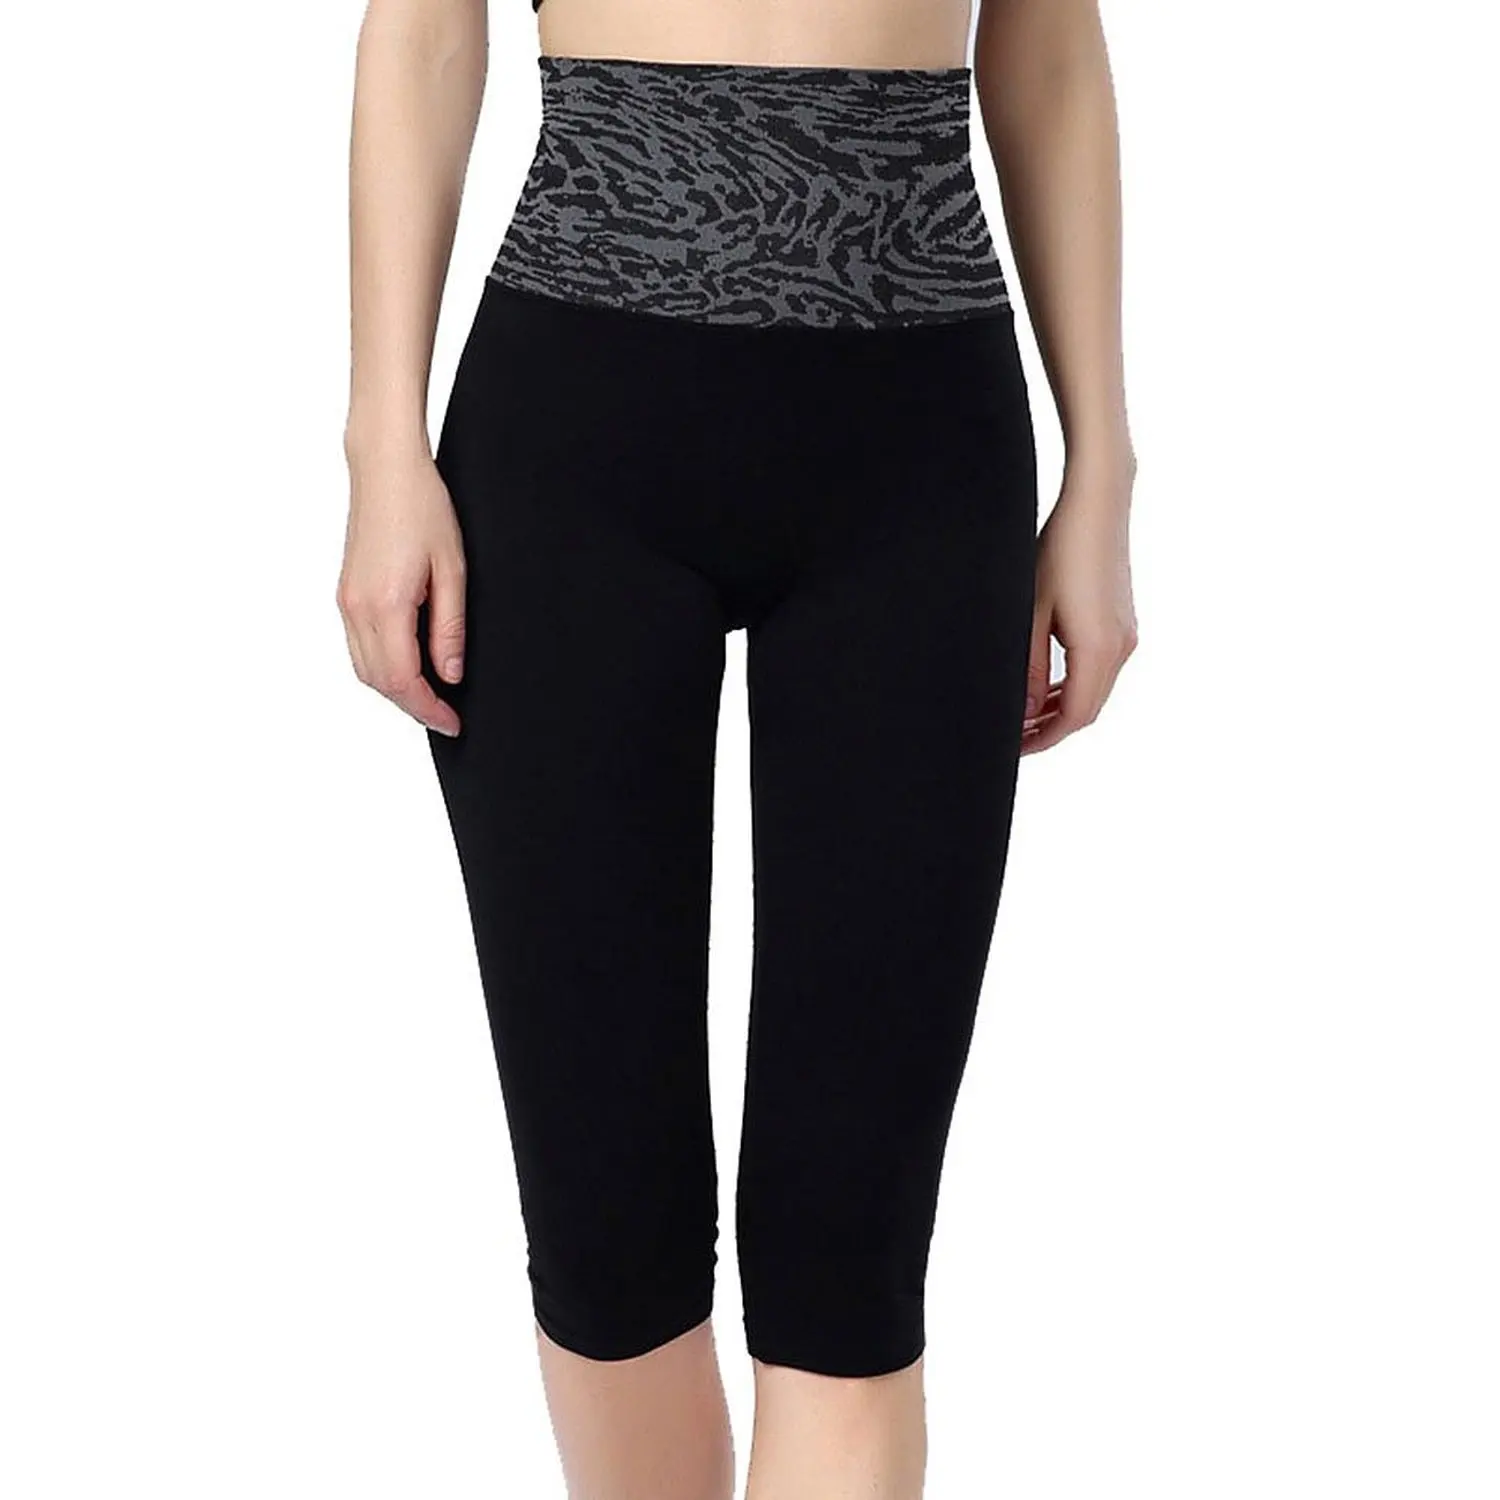 5 Pairs of Affordable Yoga Pants To Stretch Your Budget